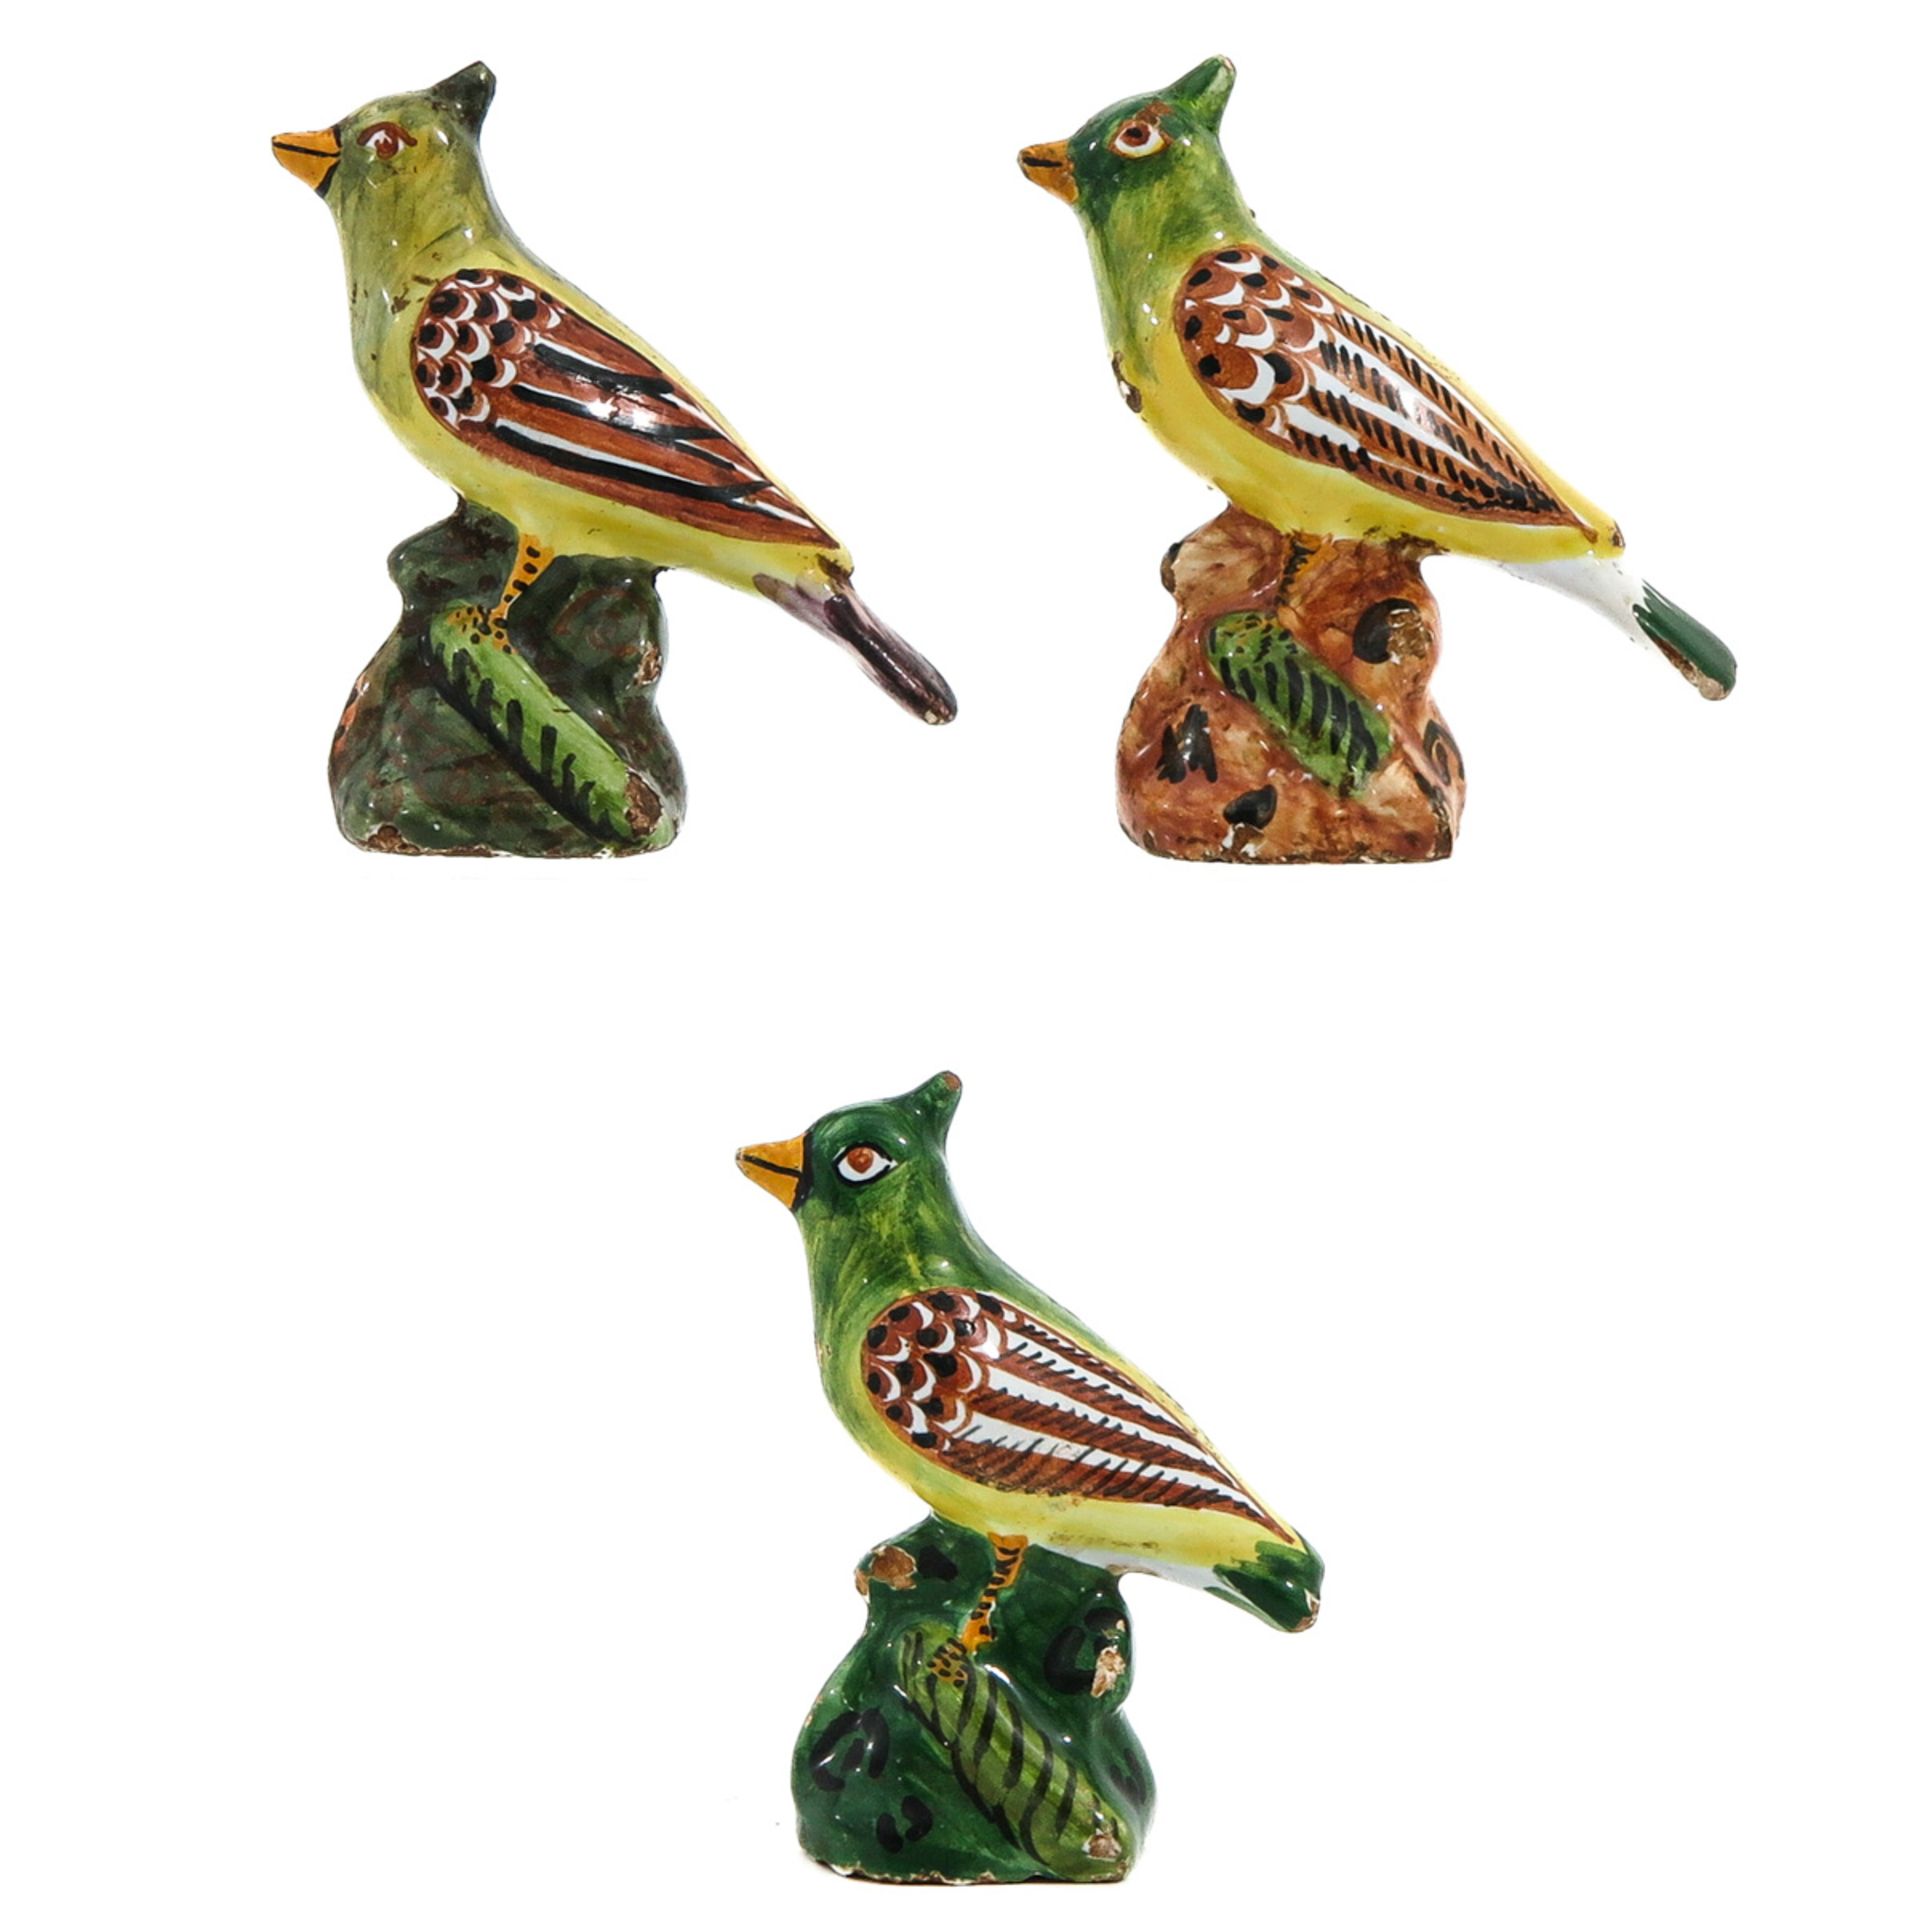 A Collection of Polychrome 18th Century Delft Birds